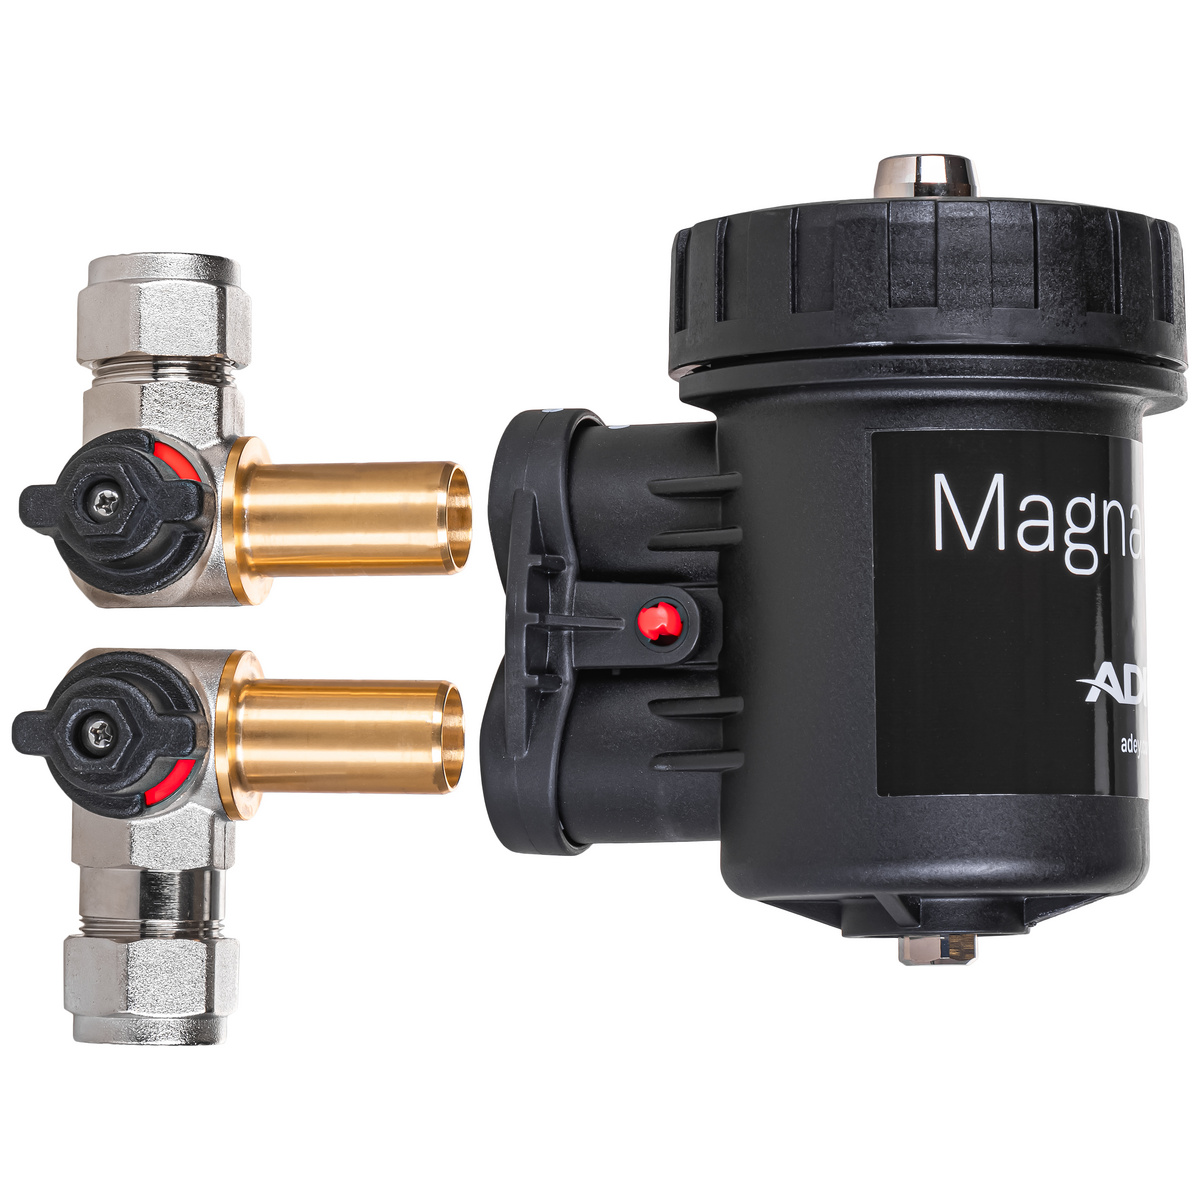 Filtr magnetyczny MagnaClean Micro2 22 mm Adey